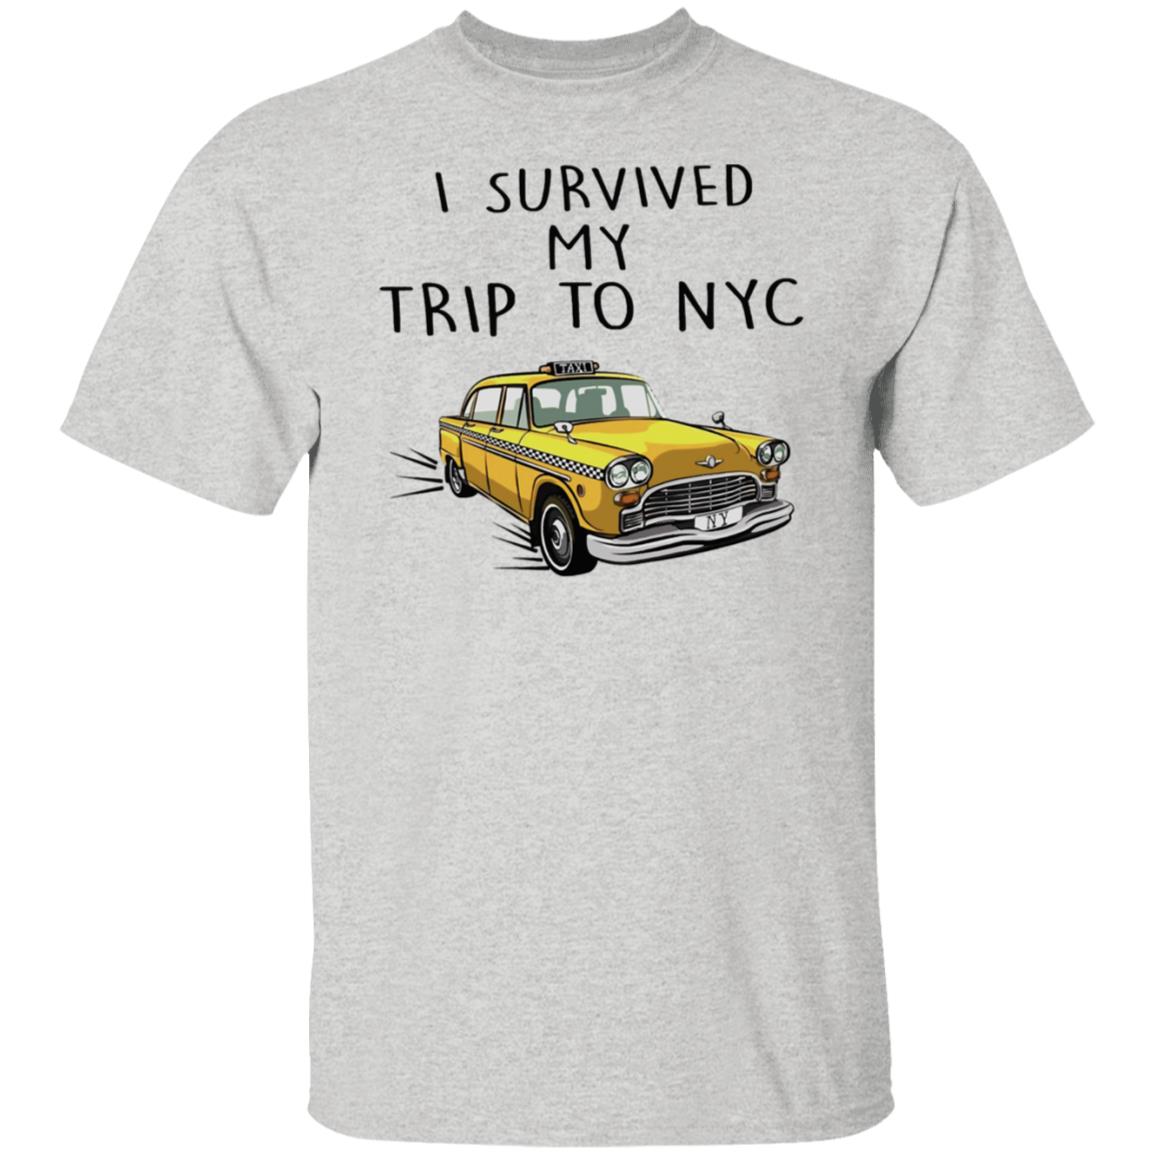 I Survived My Trip To Nyc Shirt - 10% Off - FavorMerch